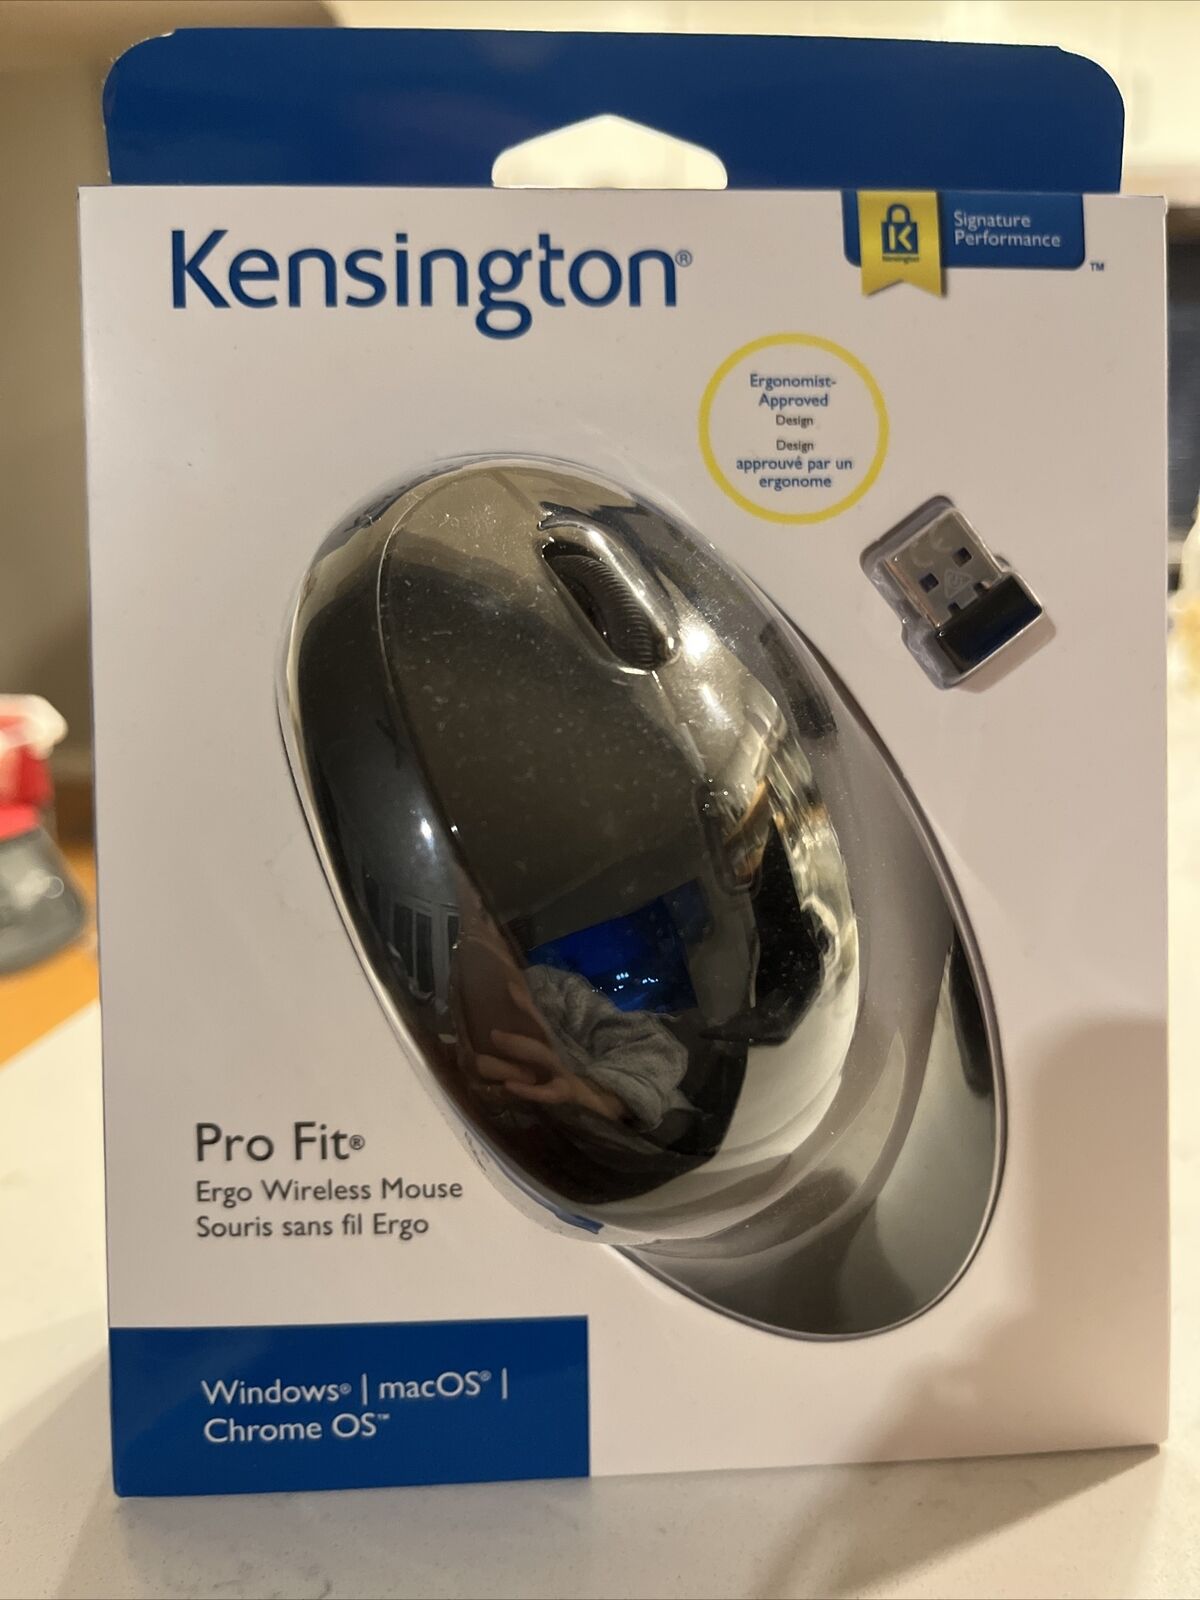 Kensington Pro Fit Ergo Wired Mouse New (K75404WW)